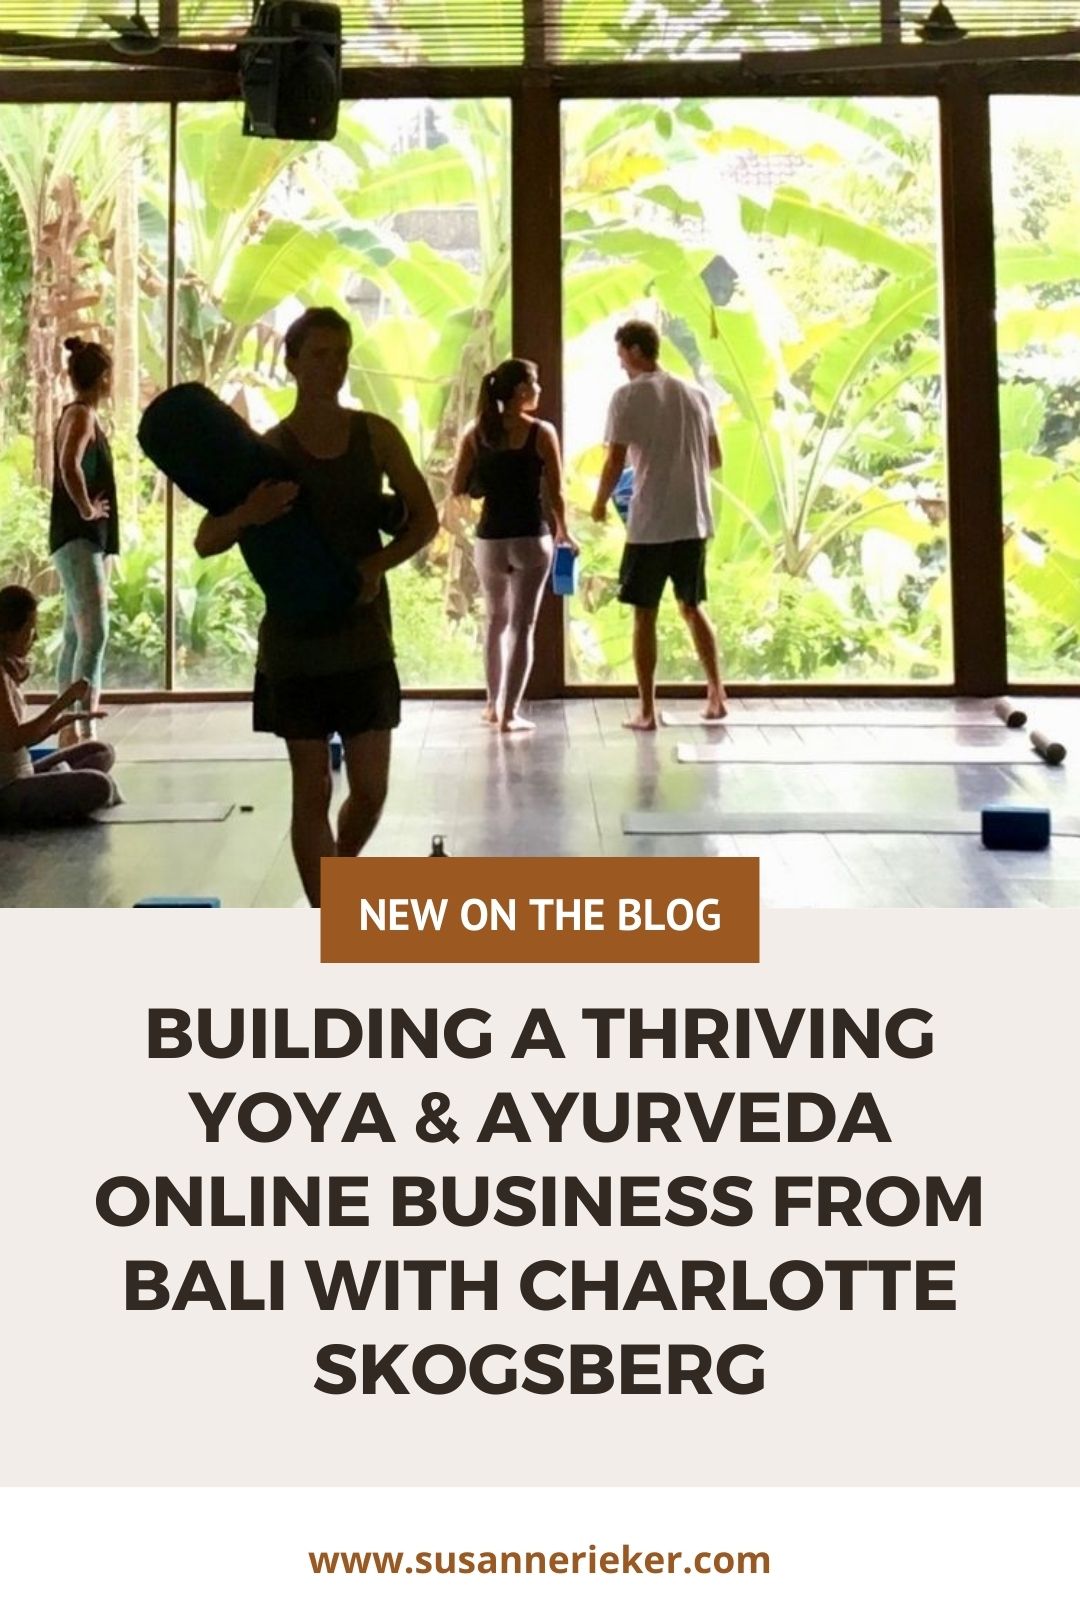 Building a Thriving Yoga & Ayurveda Online Business from Bali with Charlotte Skogsberg